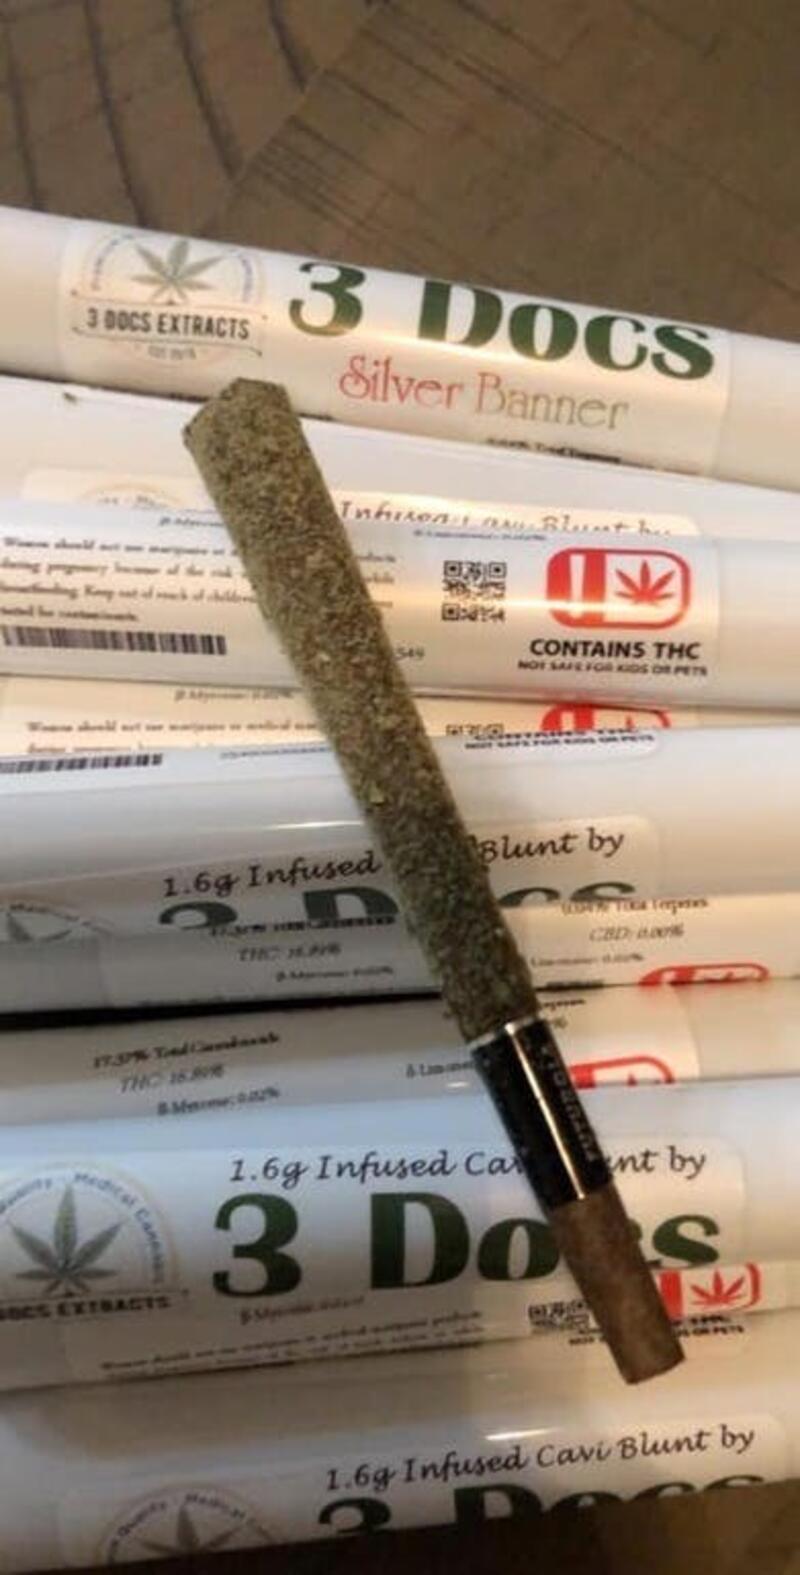 3 DOCS EXTRACTS- SILVER BANNER 1.5G CAVI BLUNT